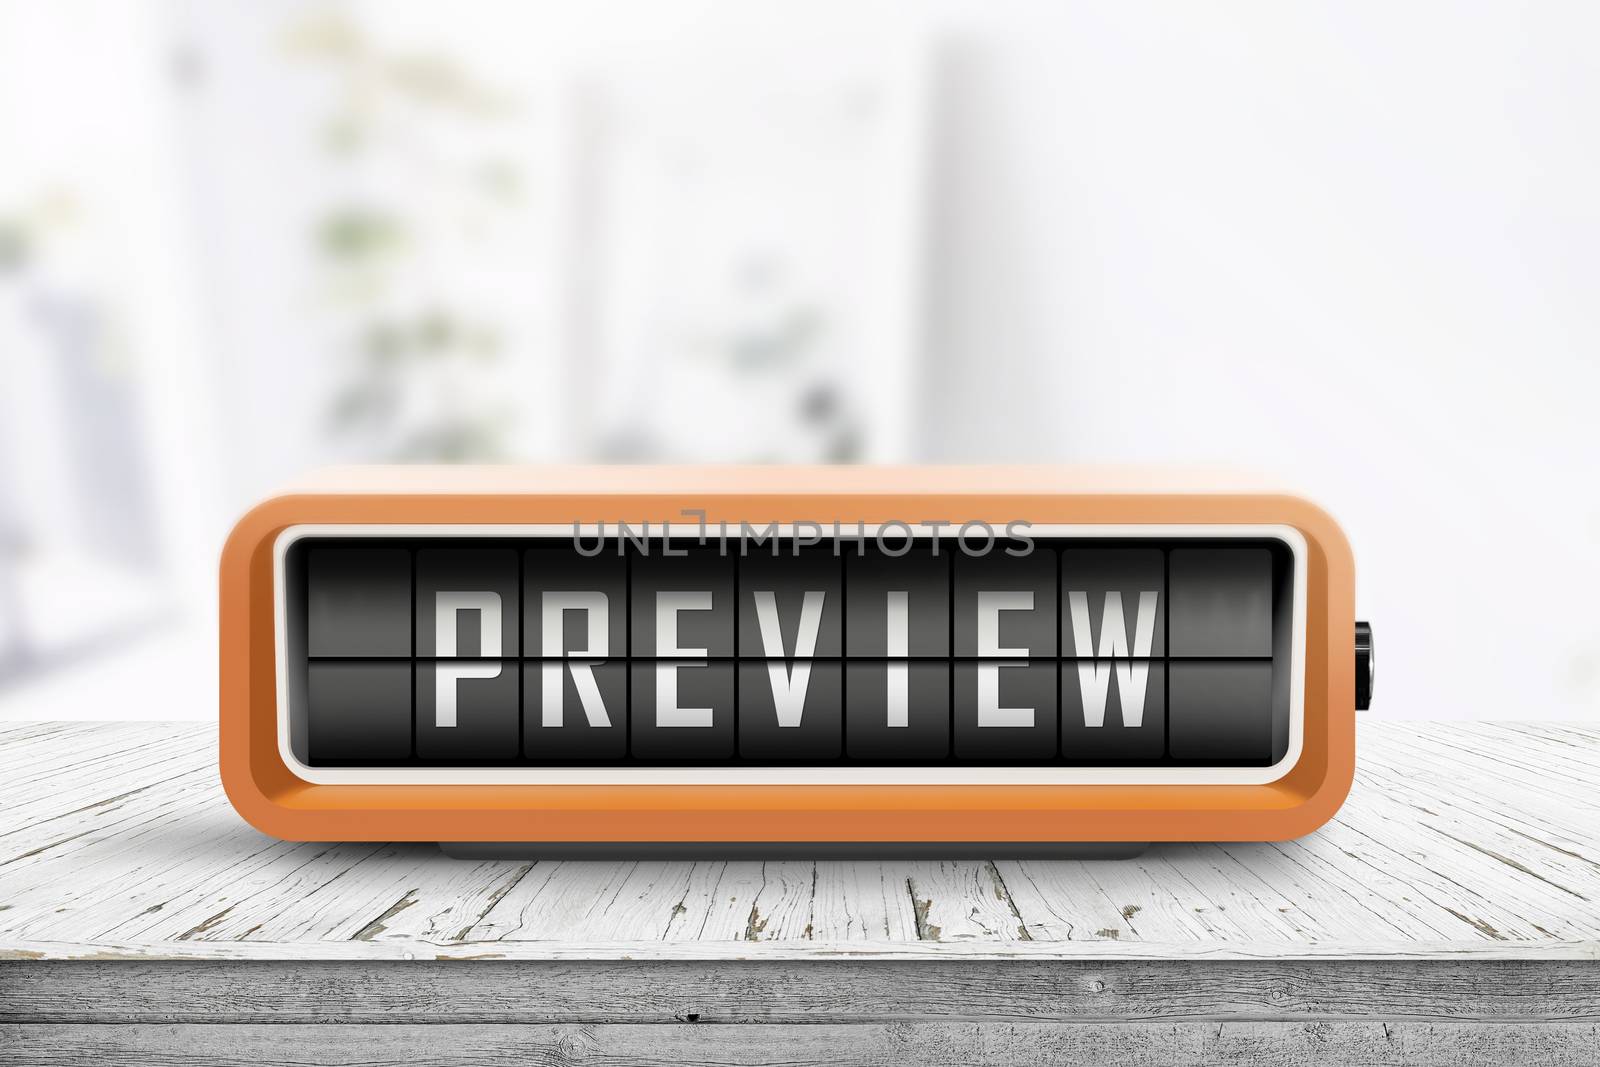 Preview sign in form of a retro alarm clock on a wooden desk in a bright room with sunlight